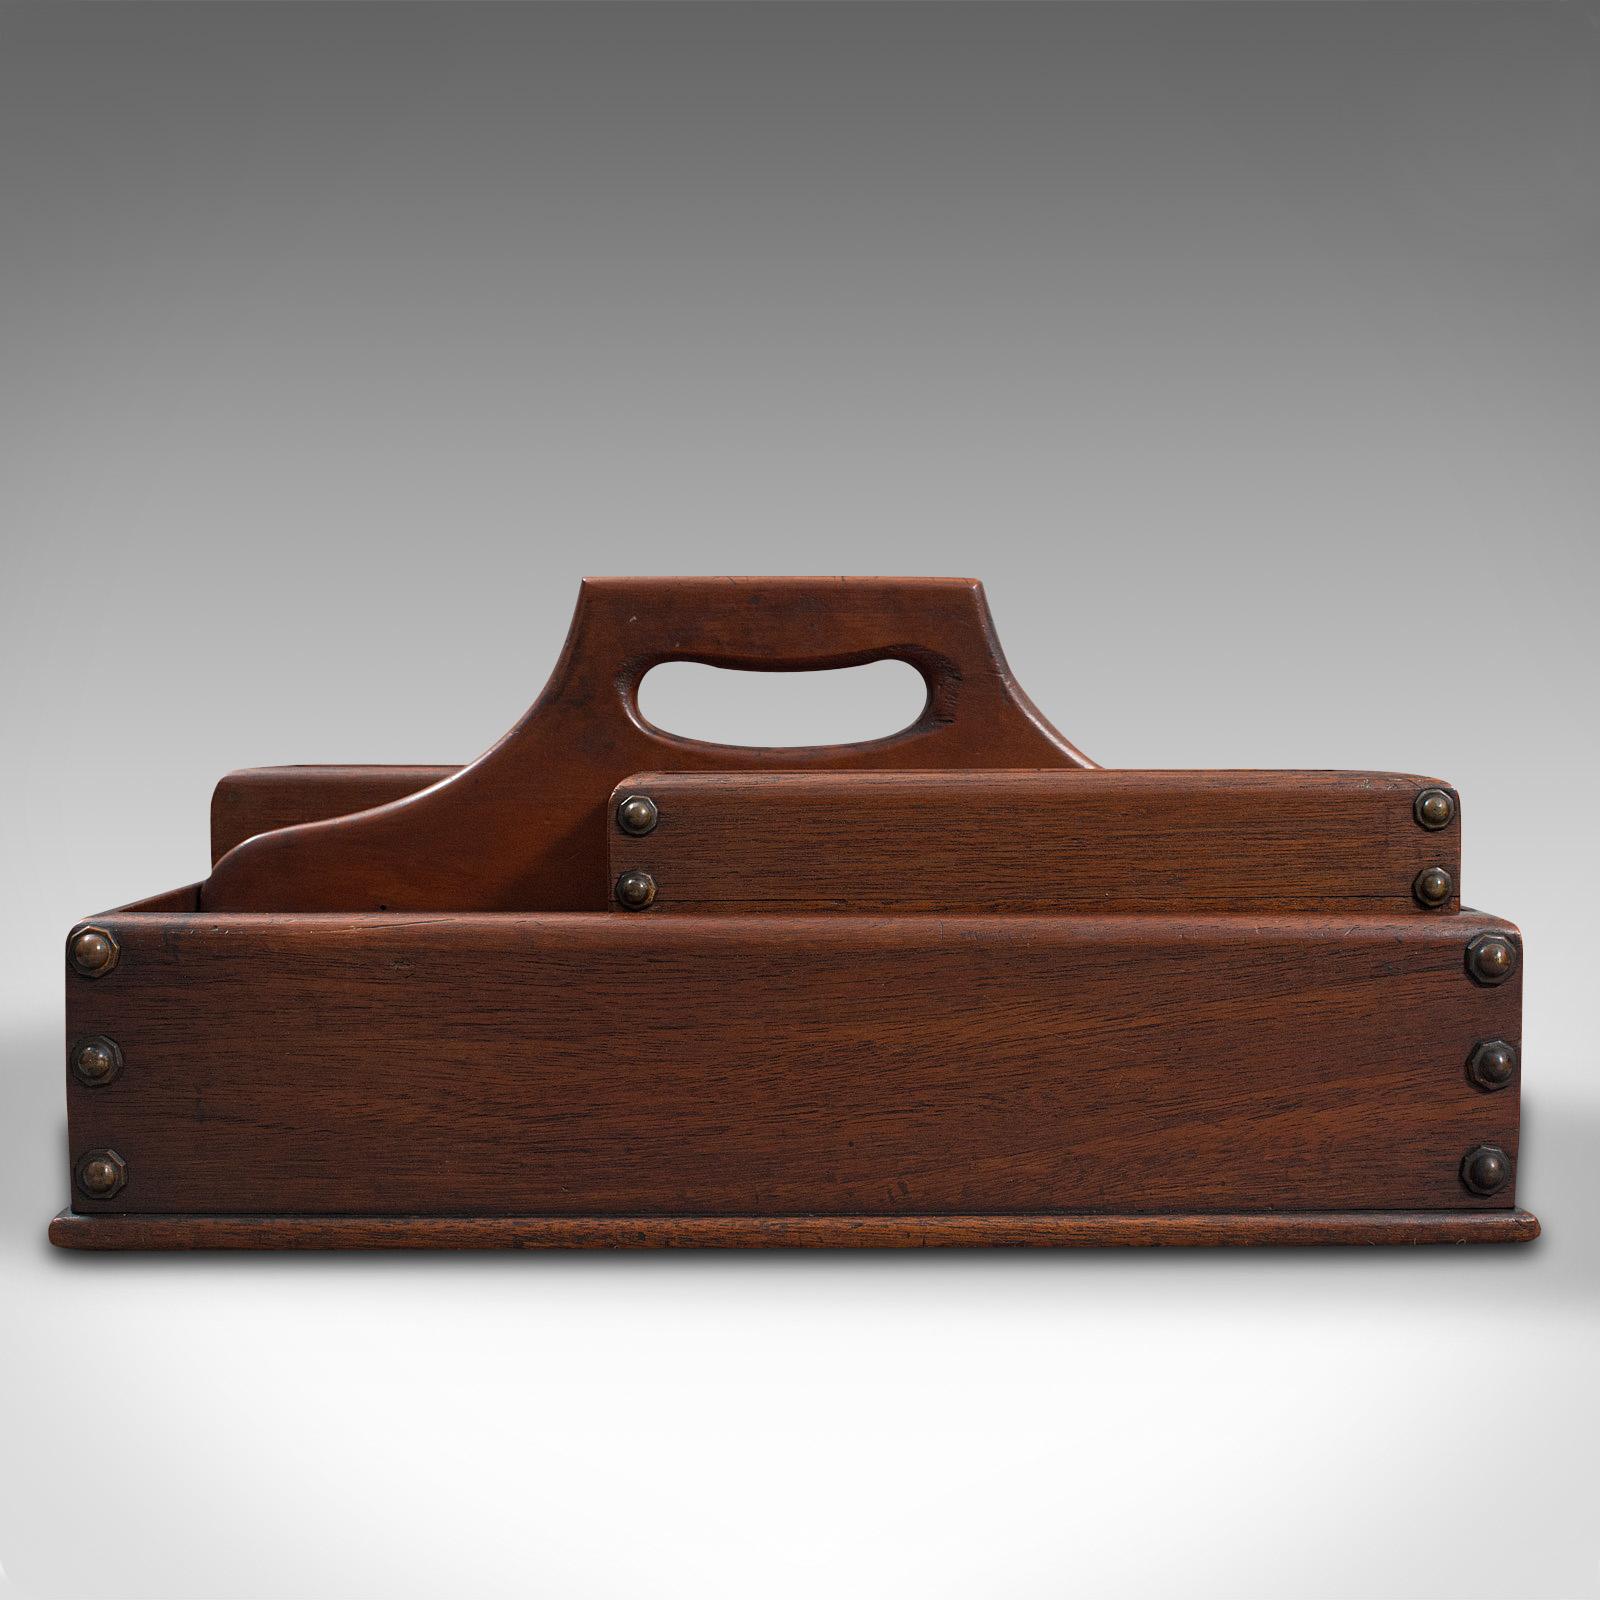 This is an antique cobbler's carry tray. An English, mahogany tool box or cutlery tray, dating to the Edwardian period, circa 1910.

Delightful carry tray with attractive form
Displays a desirable aged patina – in good original order
Select